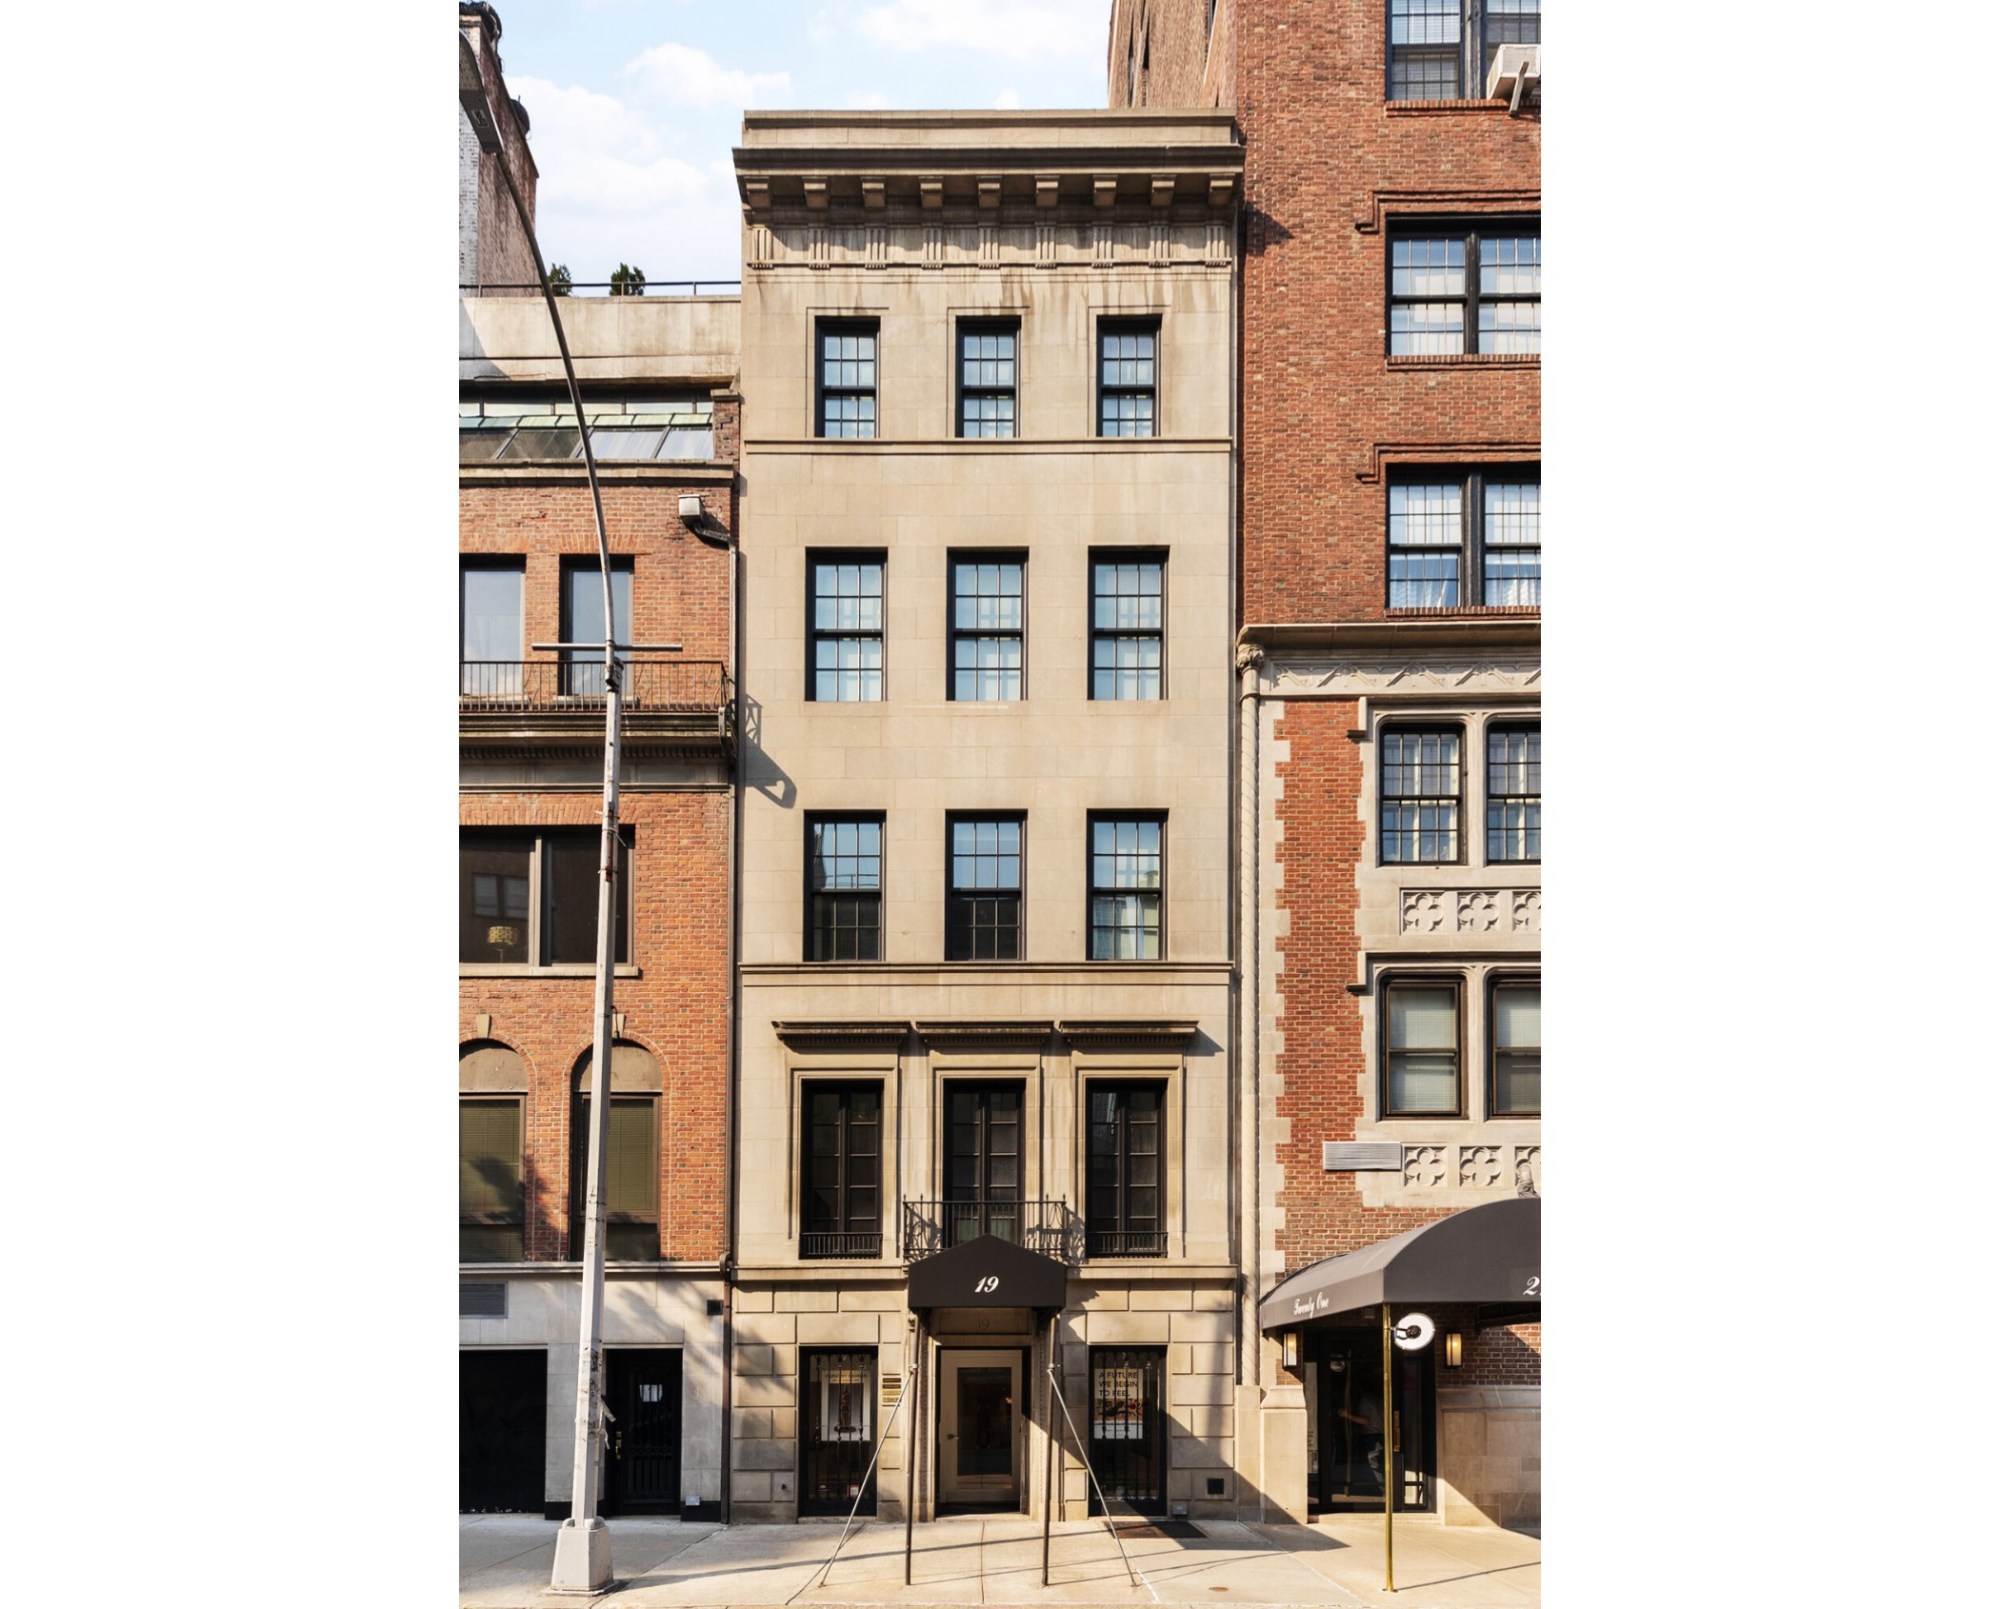 A front image of the five-story building on 19 E. 66th Street in New York's Upper East Side neighborhood, where Richard Saltoun Gallery will open its third location.